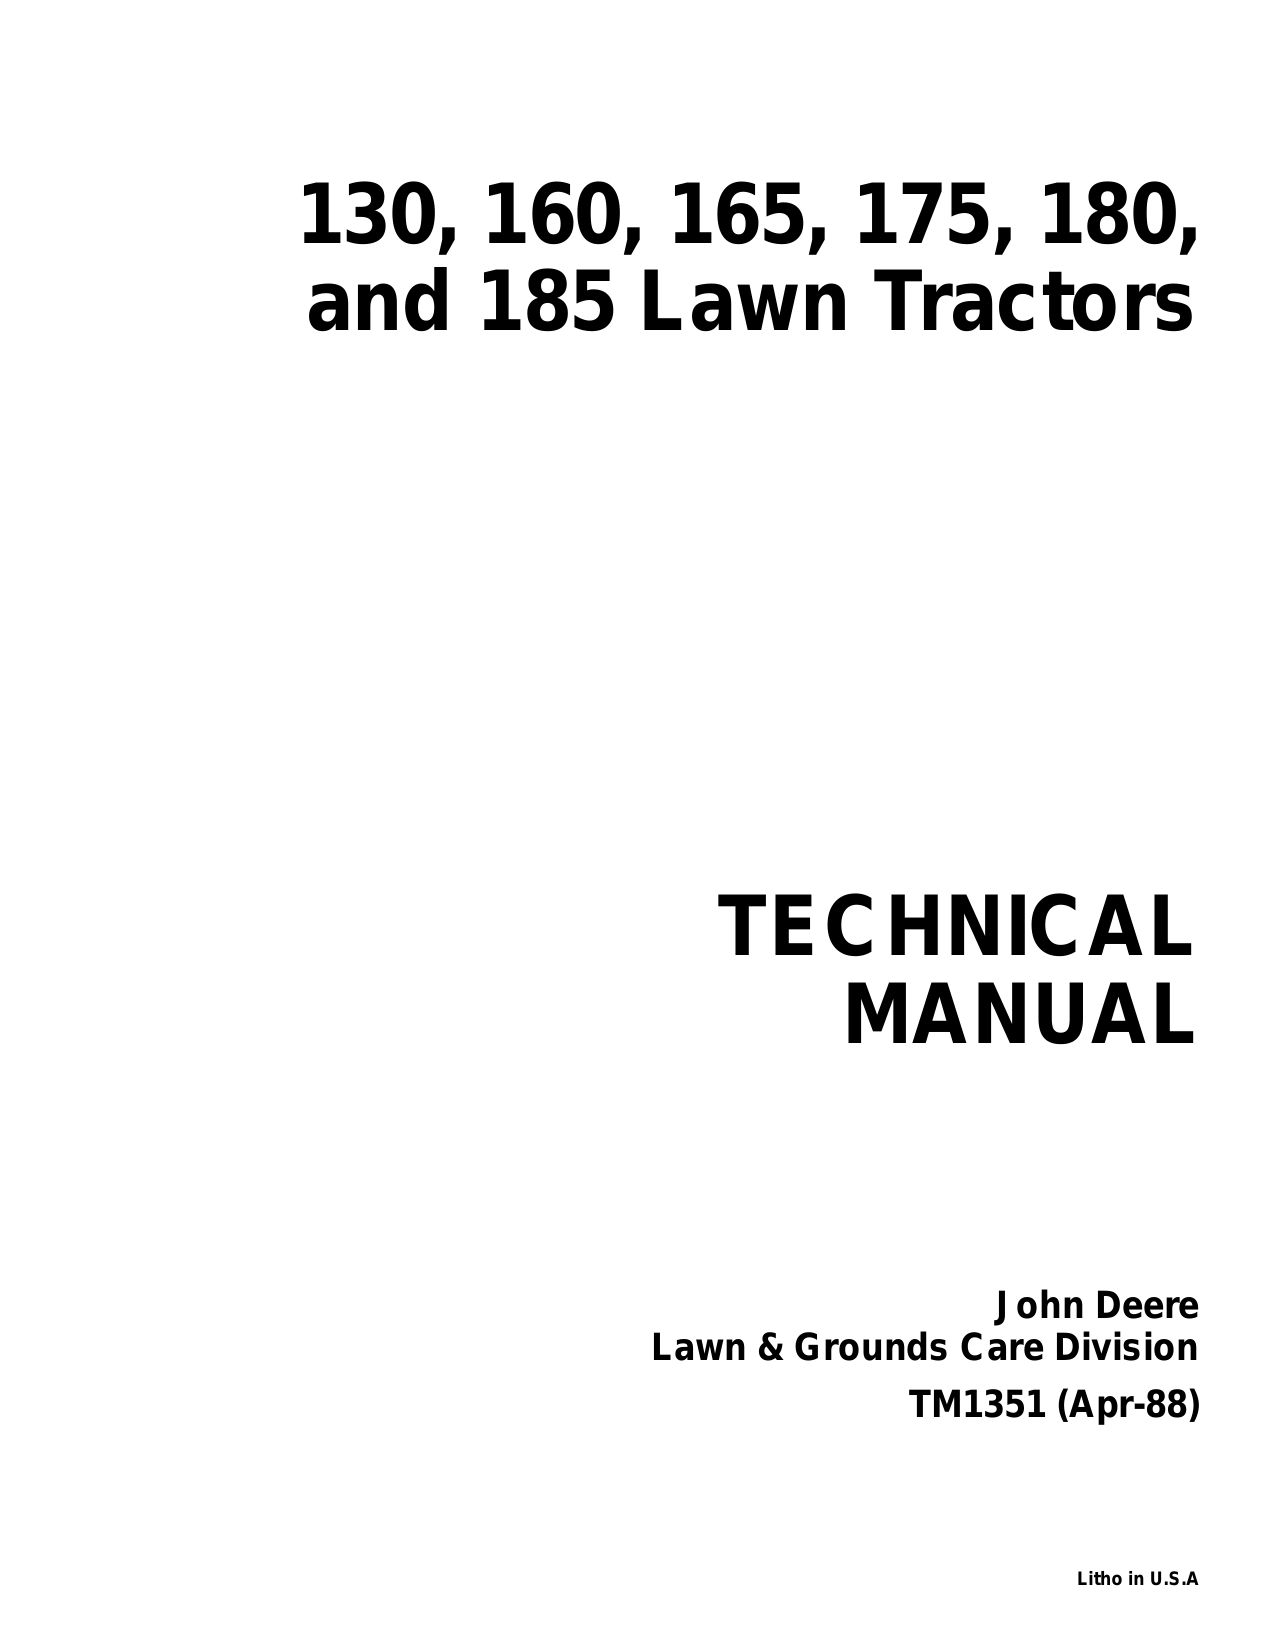 John Deere 130, 160, 165, 175, 180, 185 lawn tractor technical manual Preview image 6